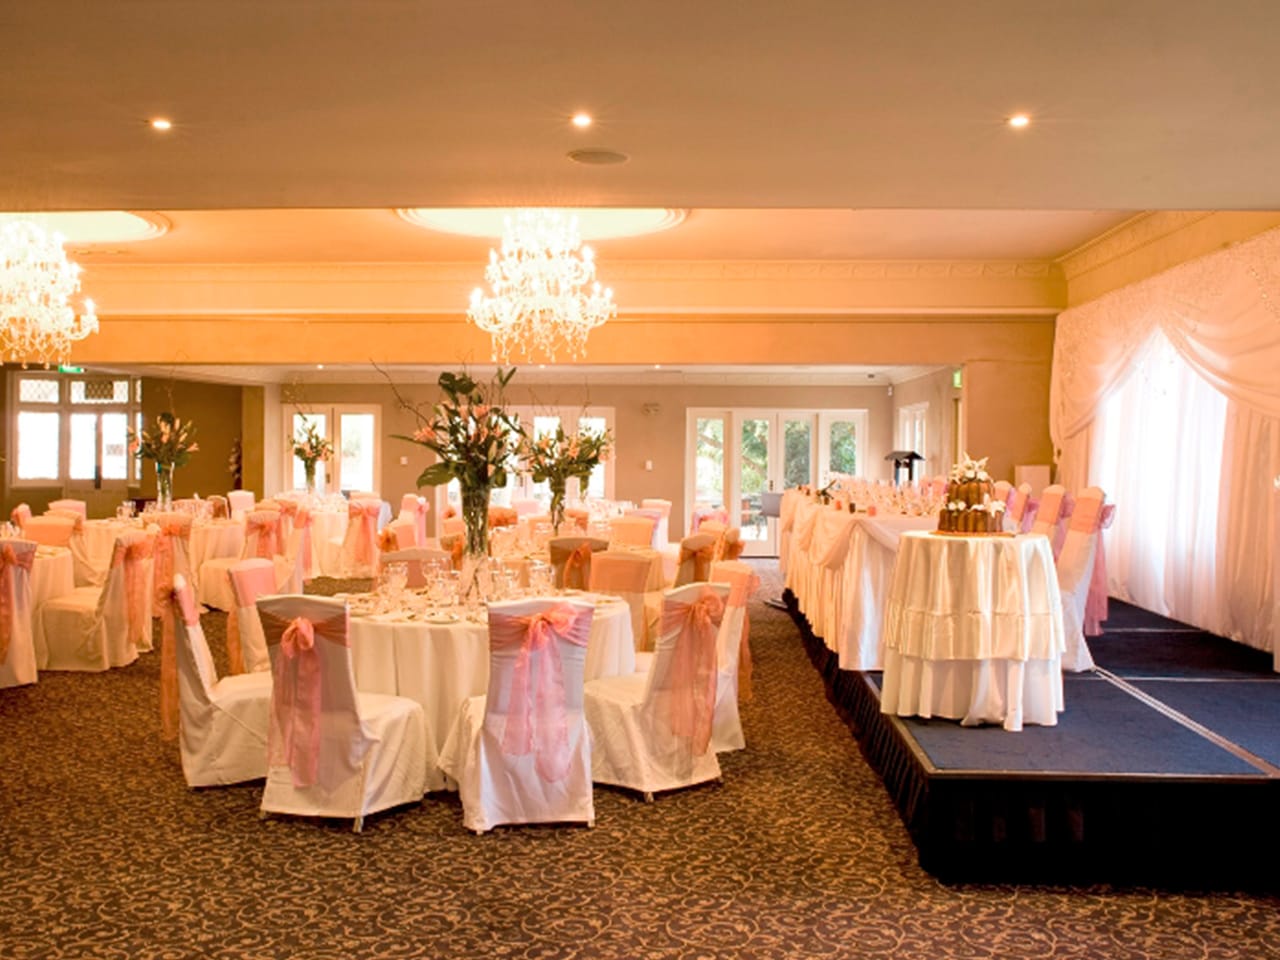 Long Table, Cake Table On Stage And Banquet Style Setup Inside The Function Room With Chandeliers